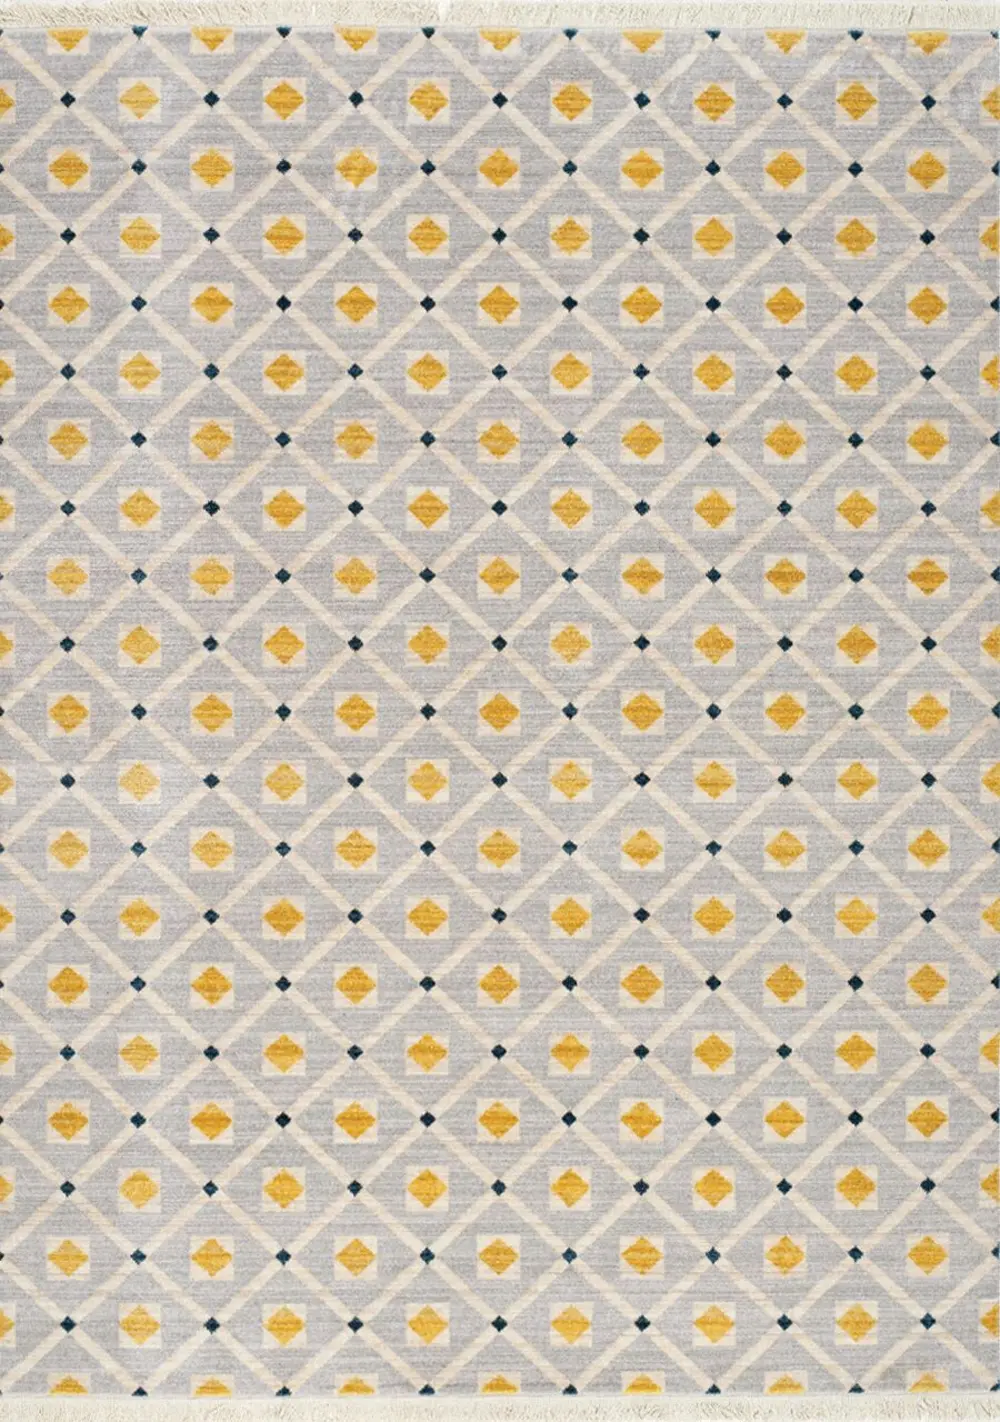 8 x 11 Large Dotted Trellis Gray and Yellow Area Rug - Promenade   -1